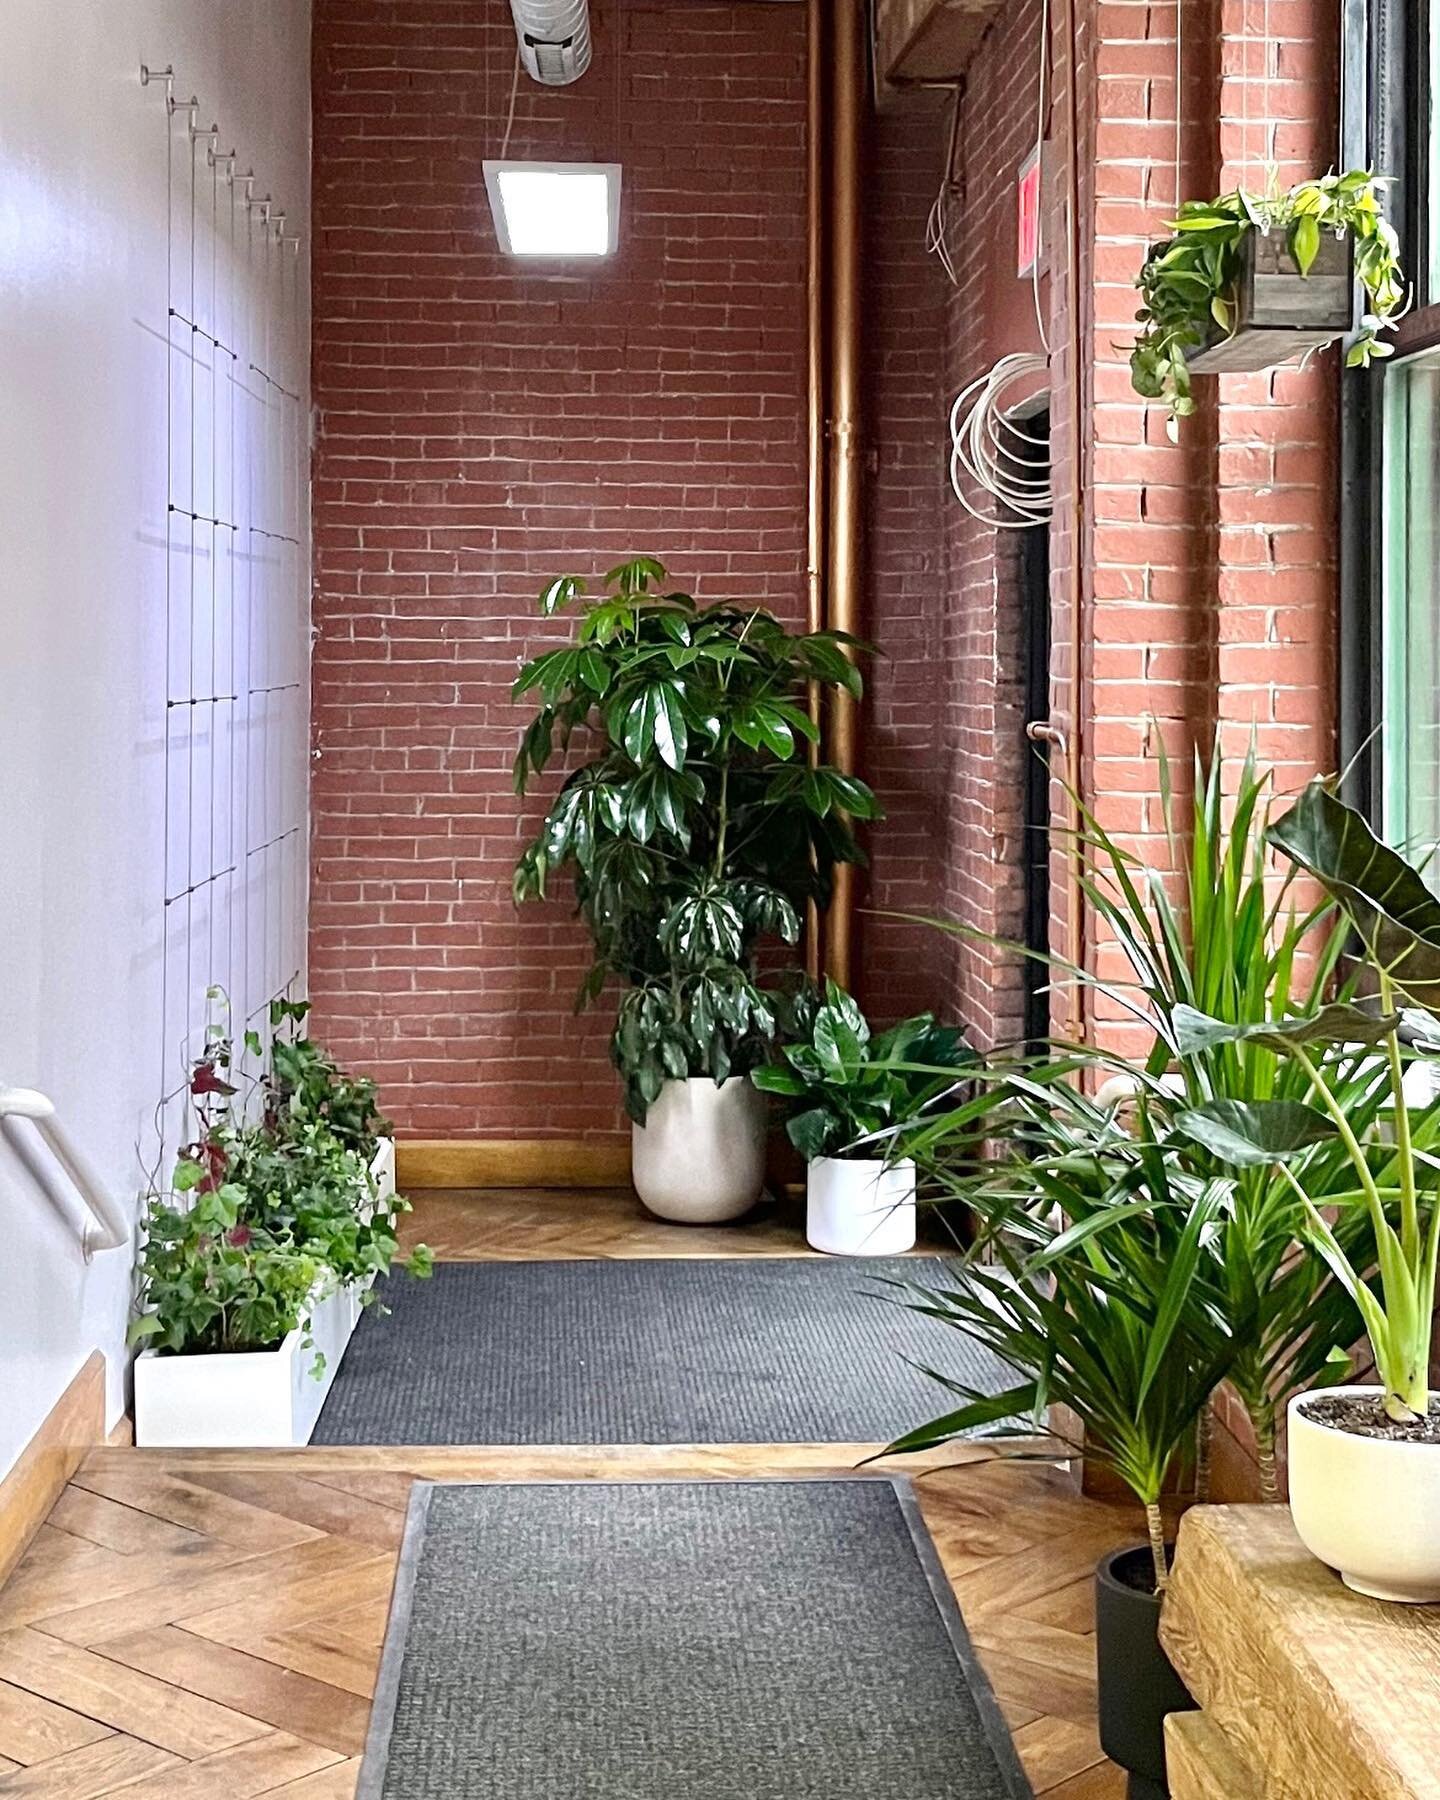 We revamped this lobby for one of our commercial clients last spring, adding a planter box and trellis to support the plants as they eventually fill the wall. Office entrances are usually just spaces for people to pass through, but we wanted to make 